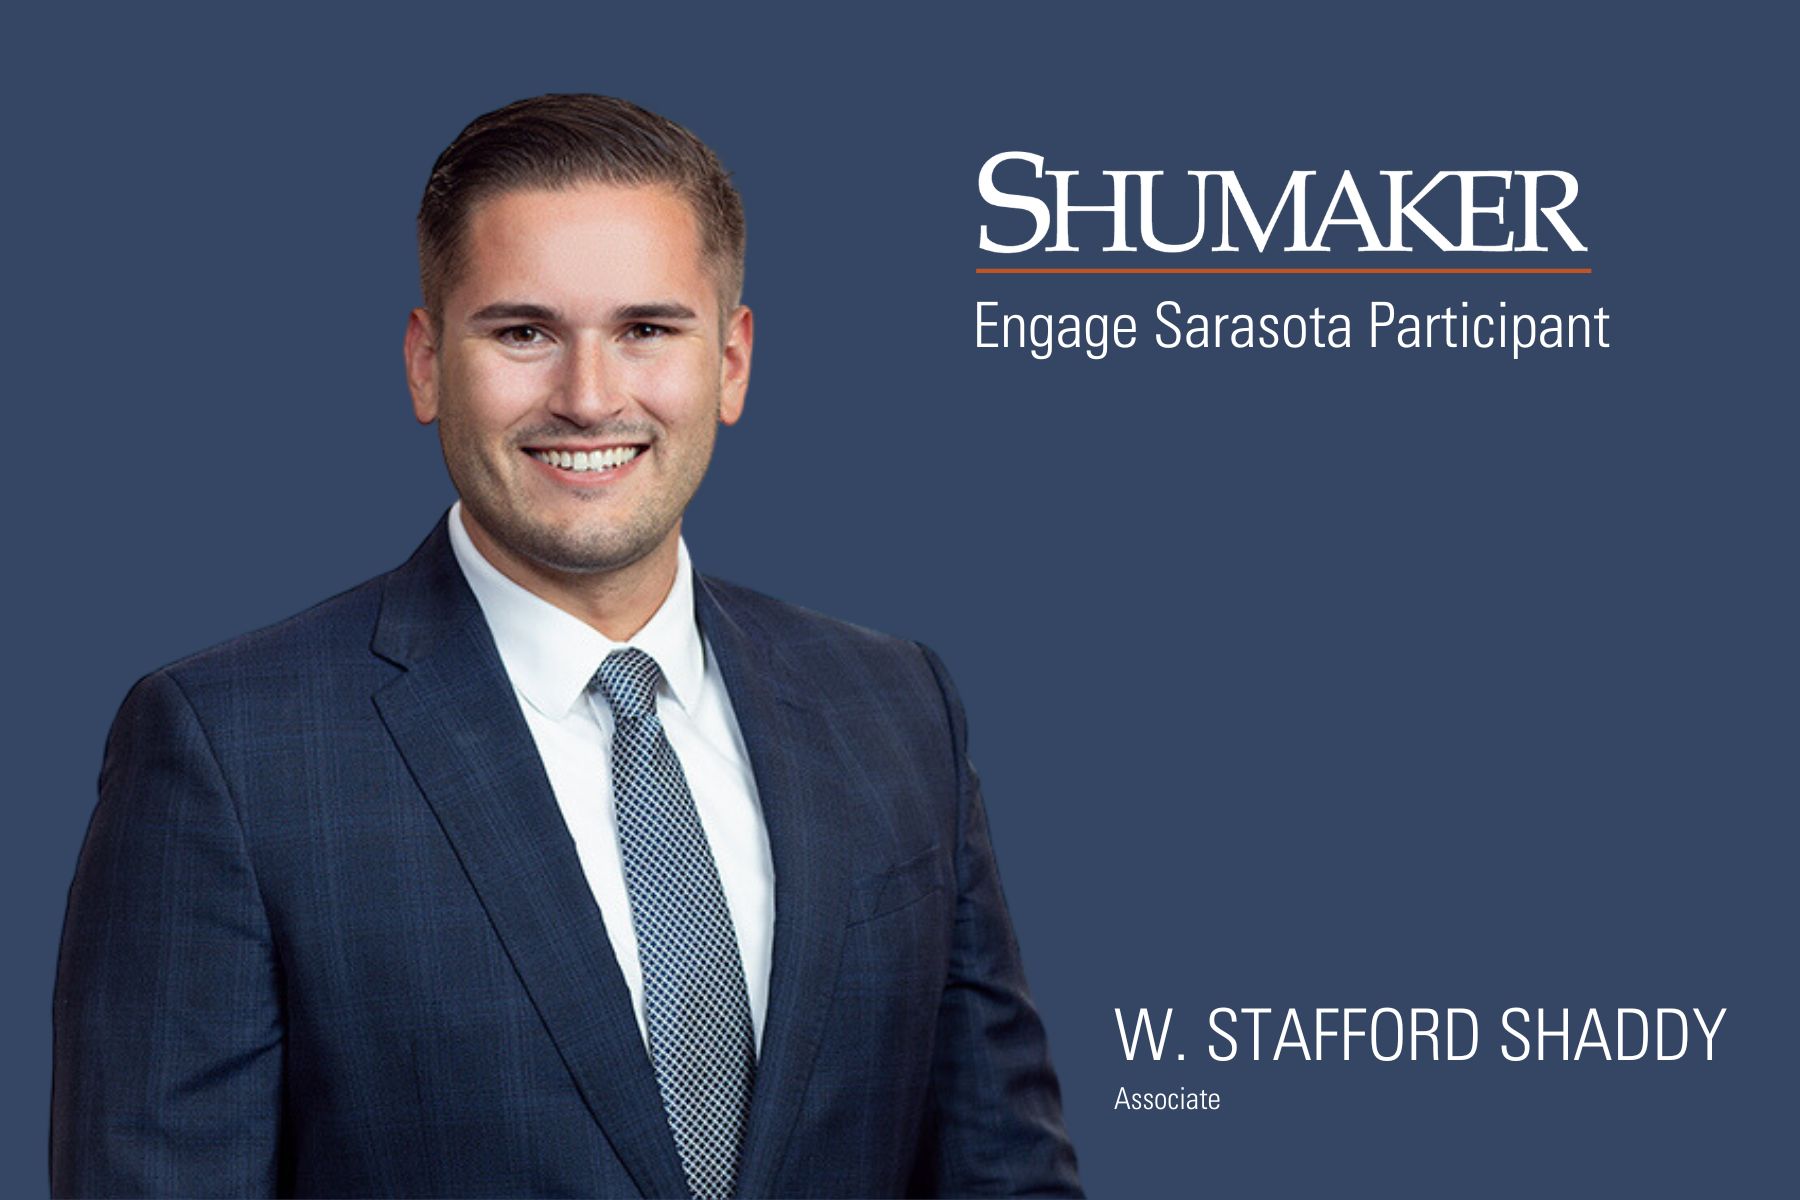 Shumaker Lawyer Poised to Drive Community Advancement;  W. Stafford Shaddy to Participate in Engage Sarasota